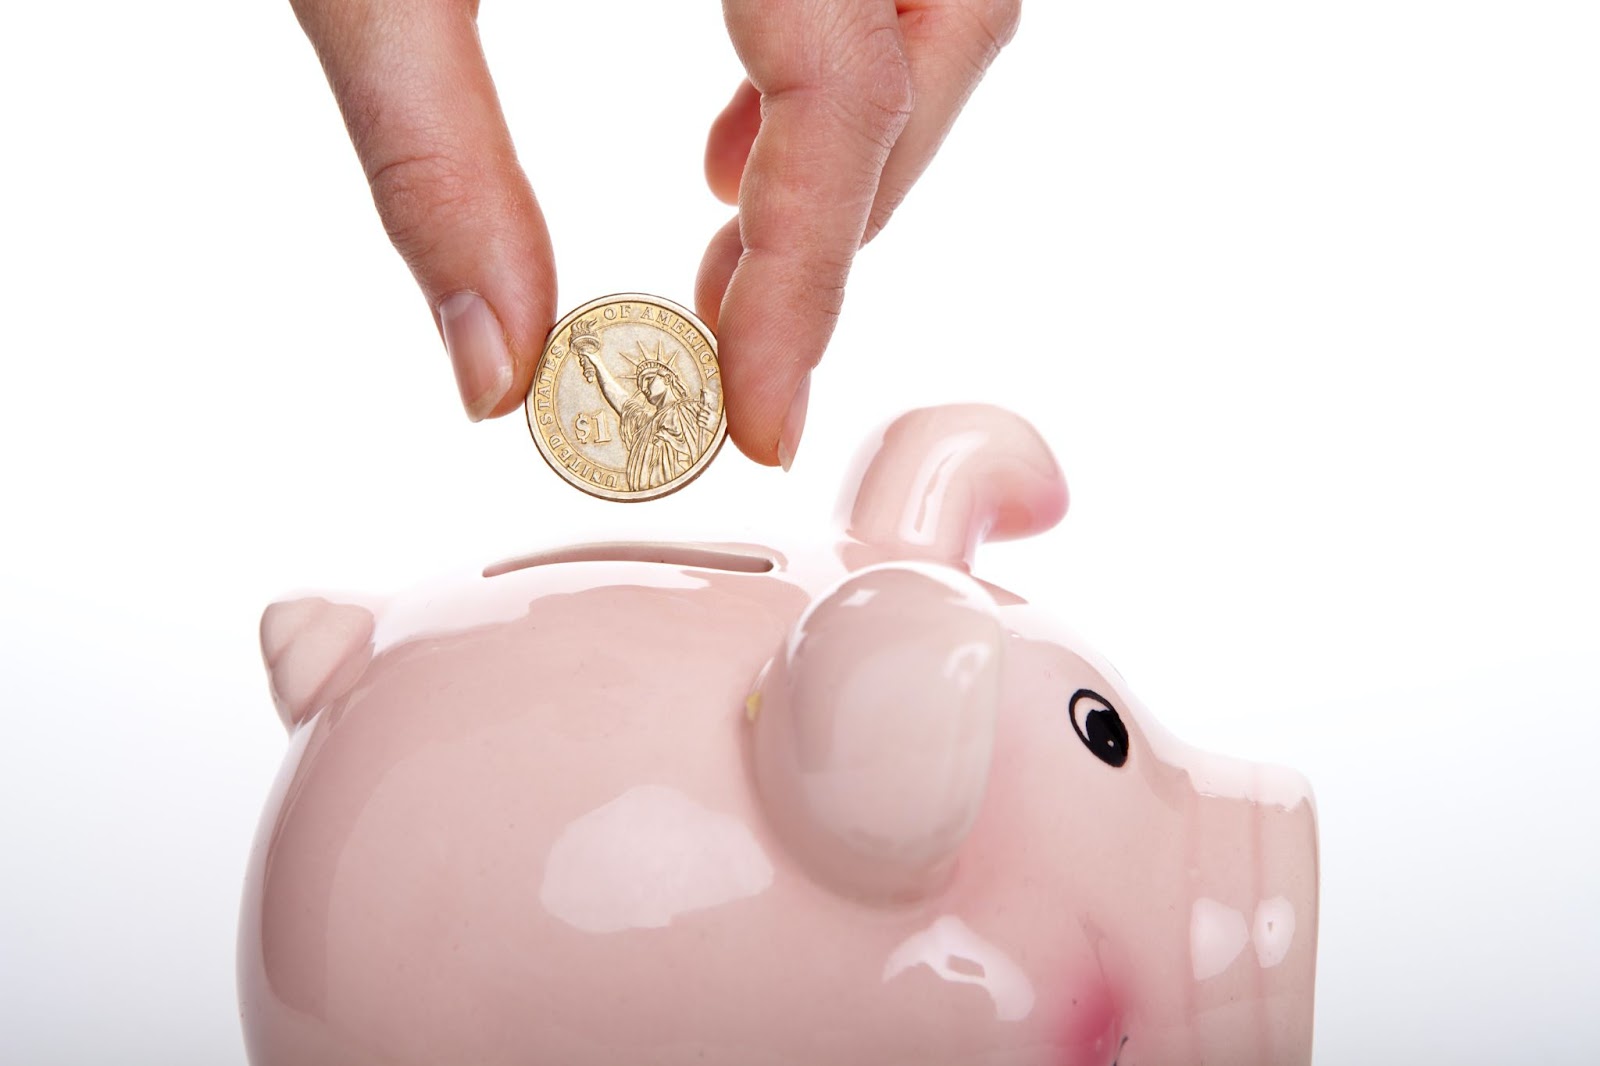 Piggybank receiving the savings from these small business marketing tips